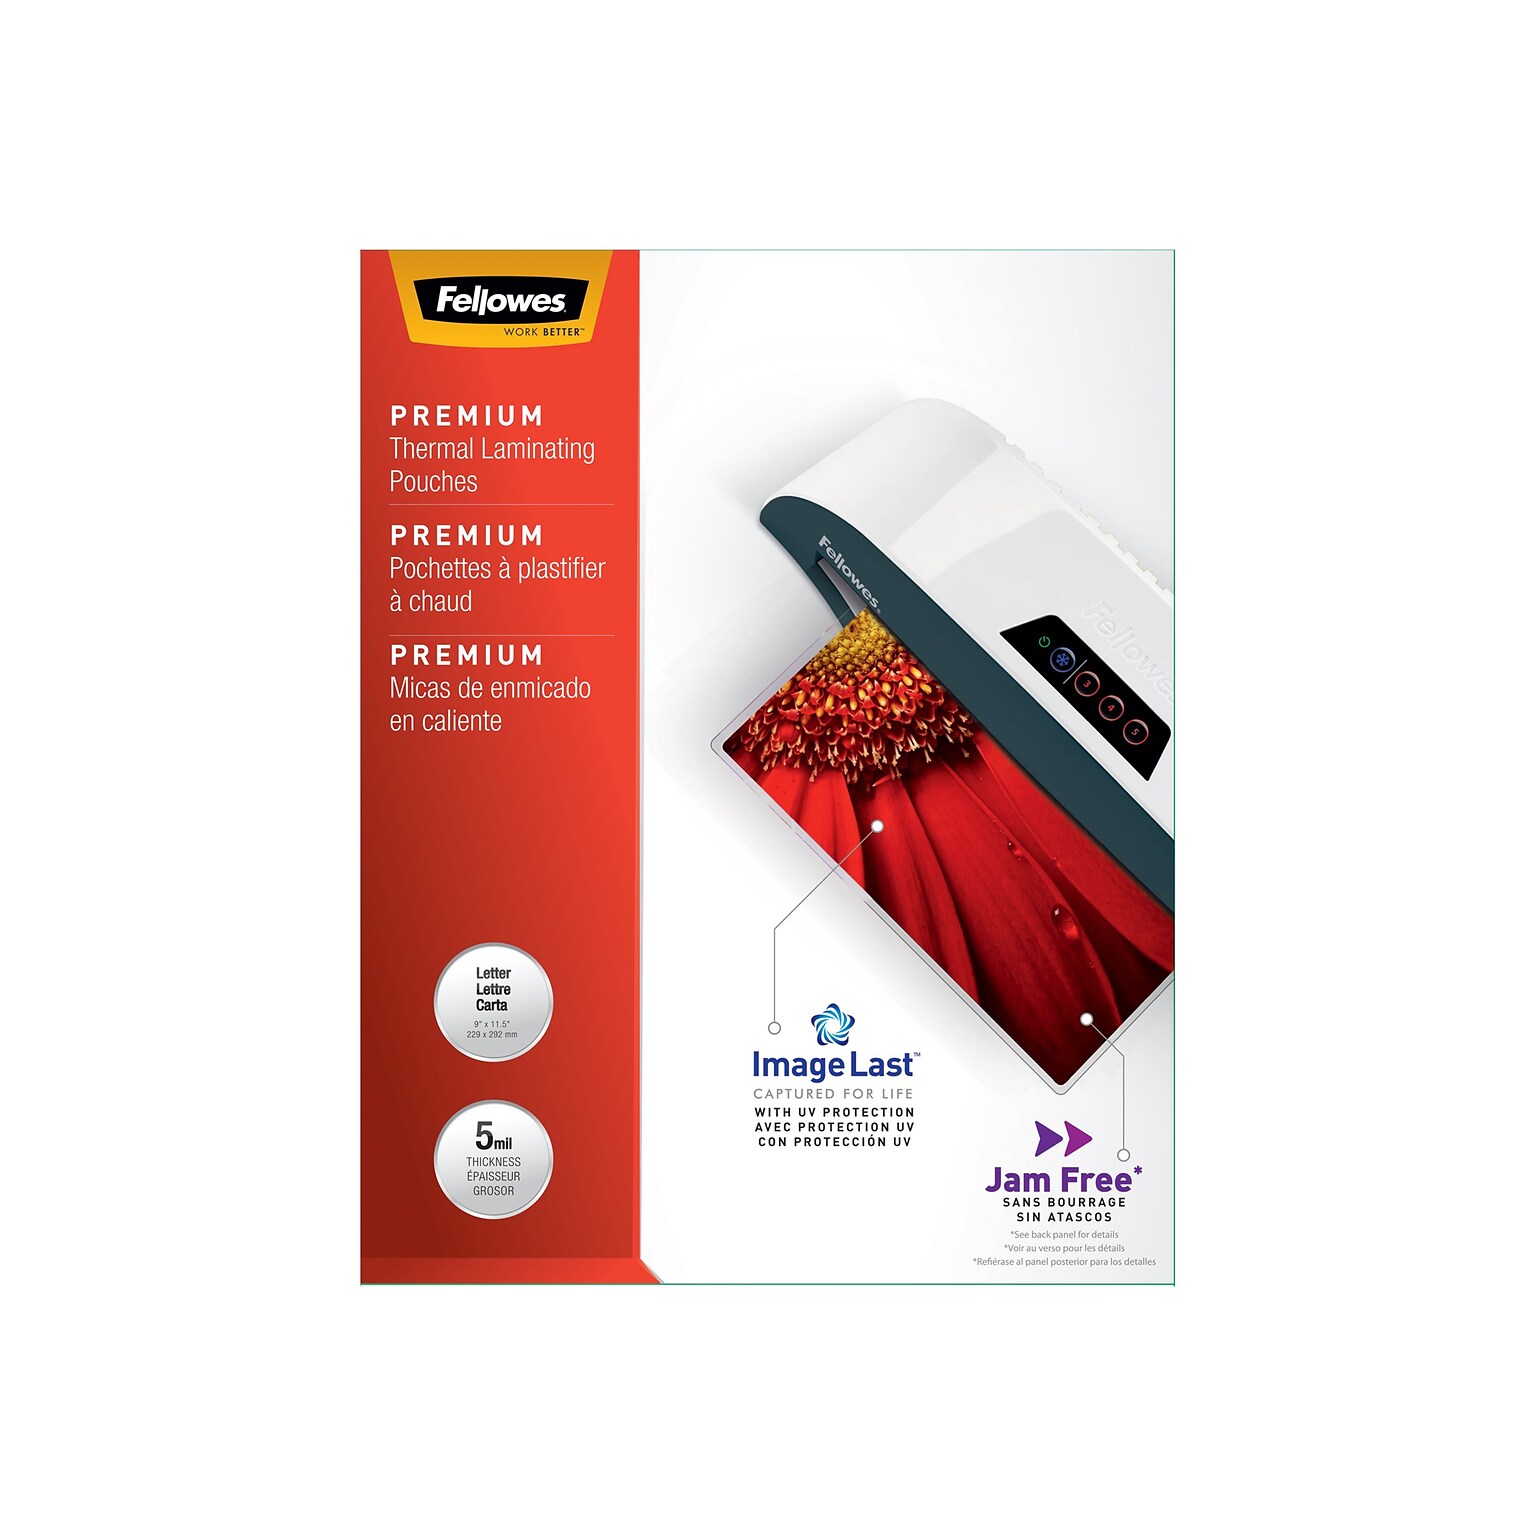 Fellowes ImageLast Premium Thermal Laminating Pouches, Letter Size, 5 Mil, 200/Pack (5245301)